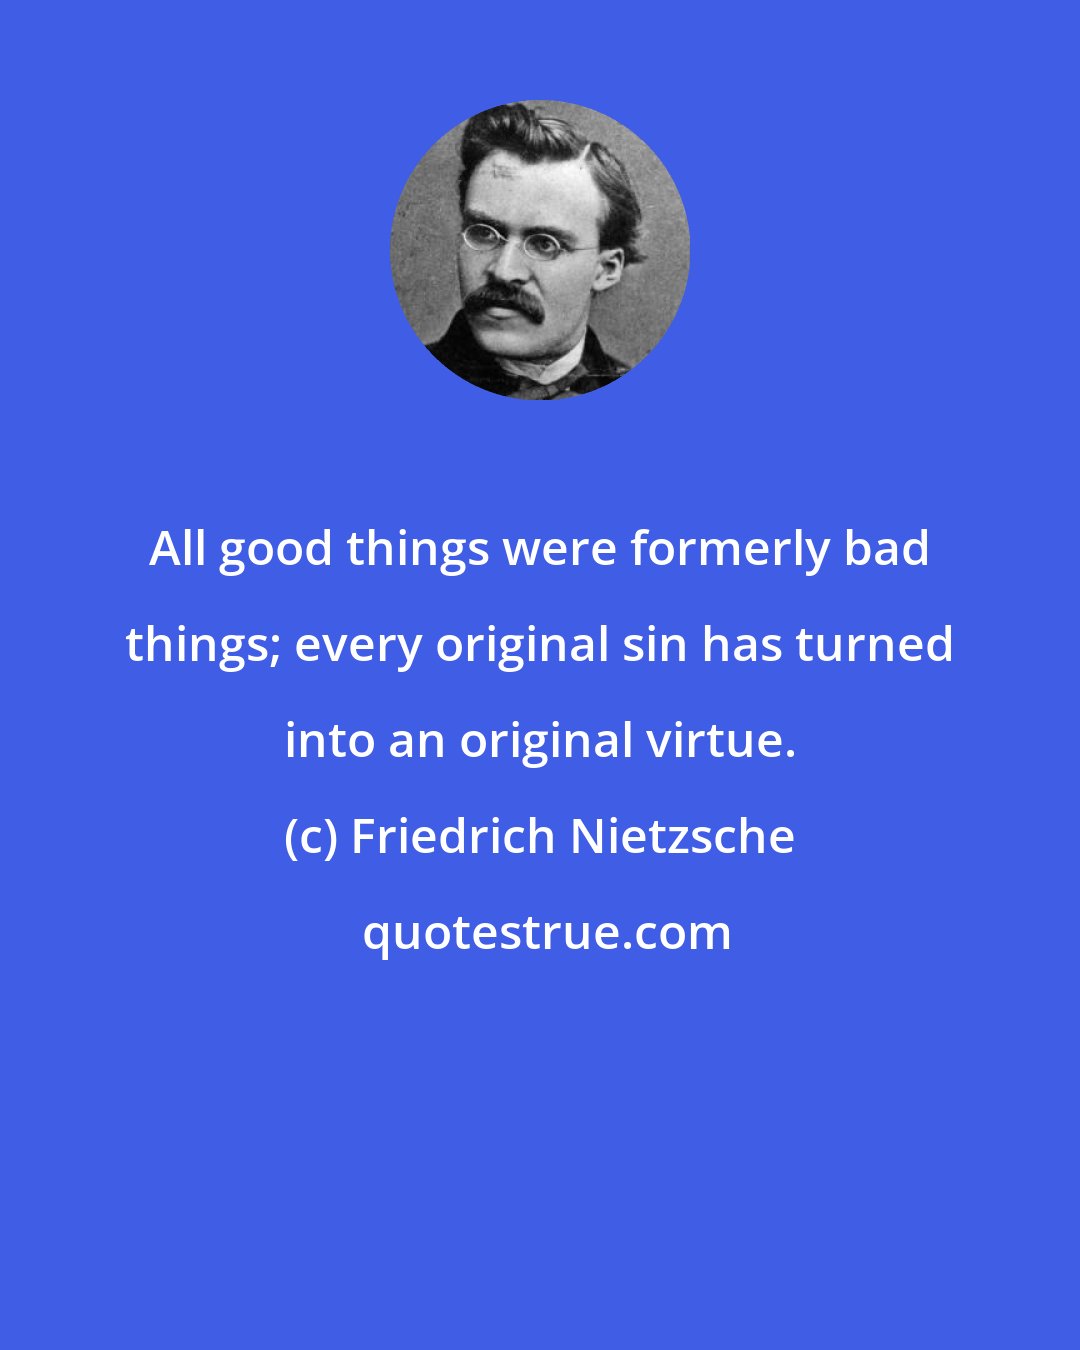 Friedrich Nietzsche: All good things were formerly bad things; every original sin has turned into an original virtue.